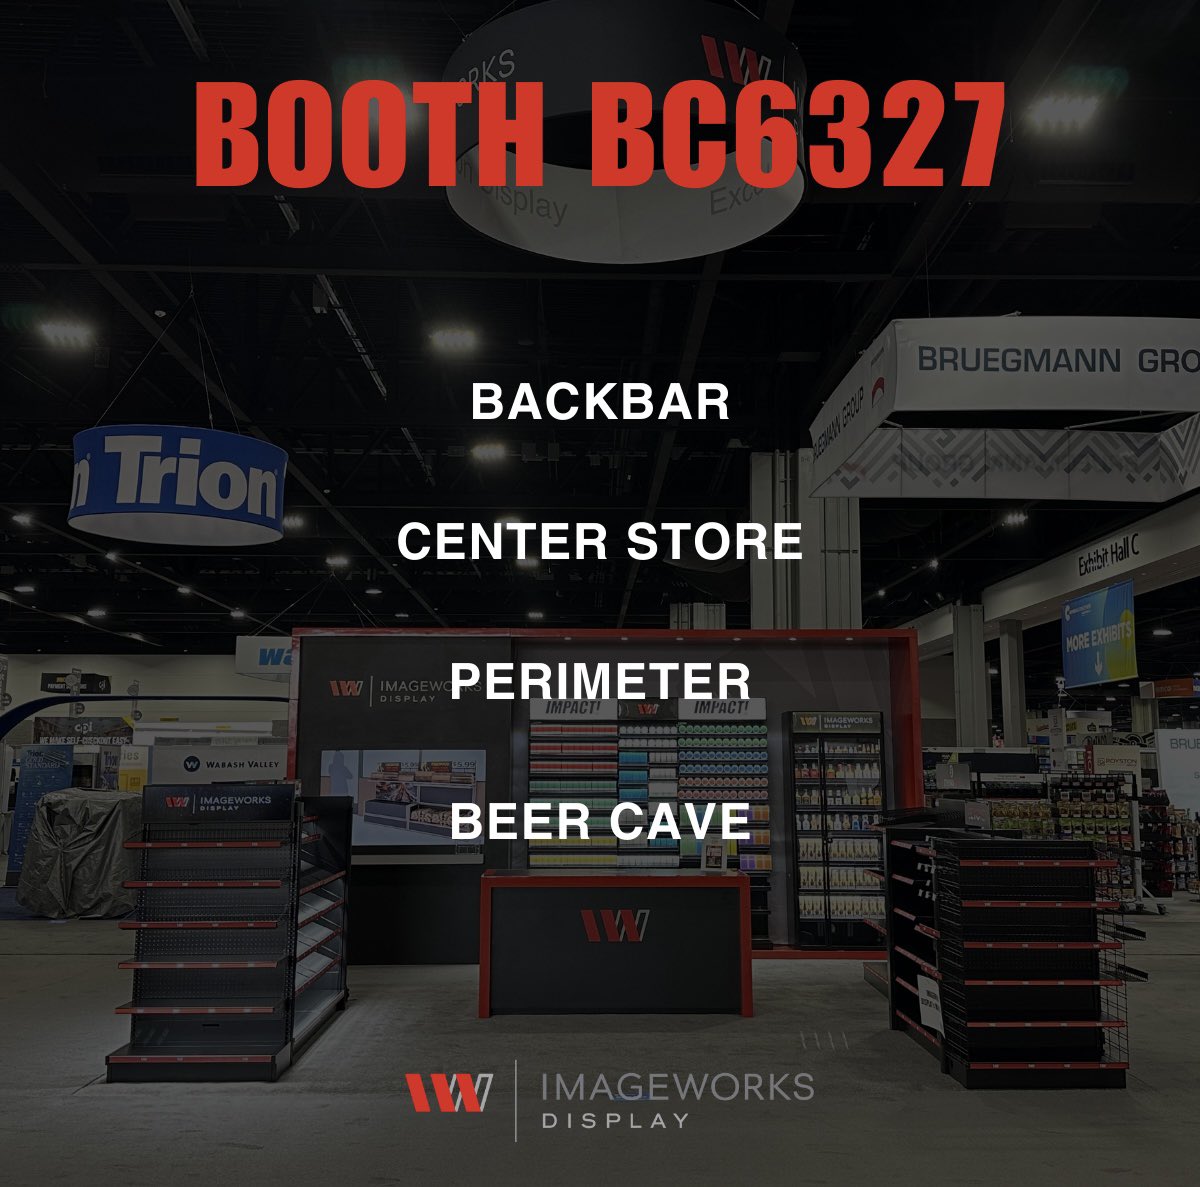 It's show time! Stop by Booth BC6327 to see ImageWorks' suite of total store solutions!
 
#NACS2023 #retailfixtures #conveniencestore #totalstoresolutions